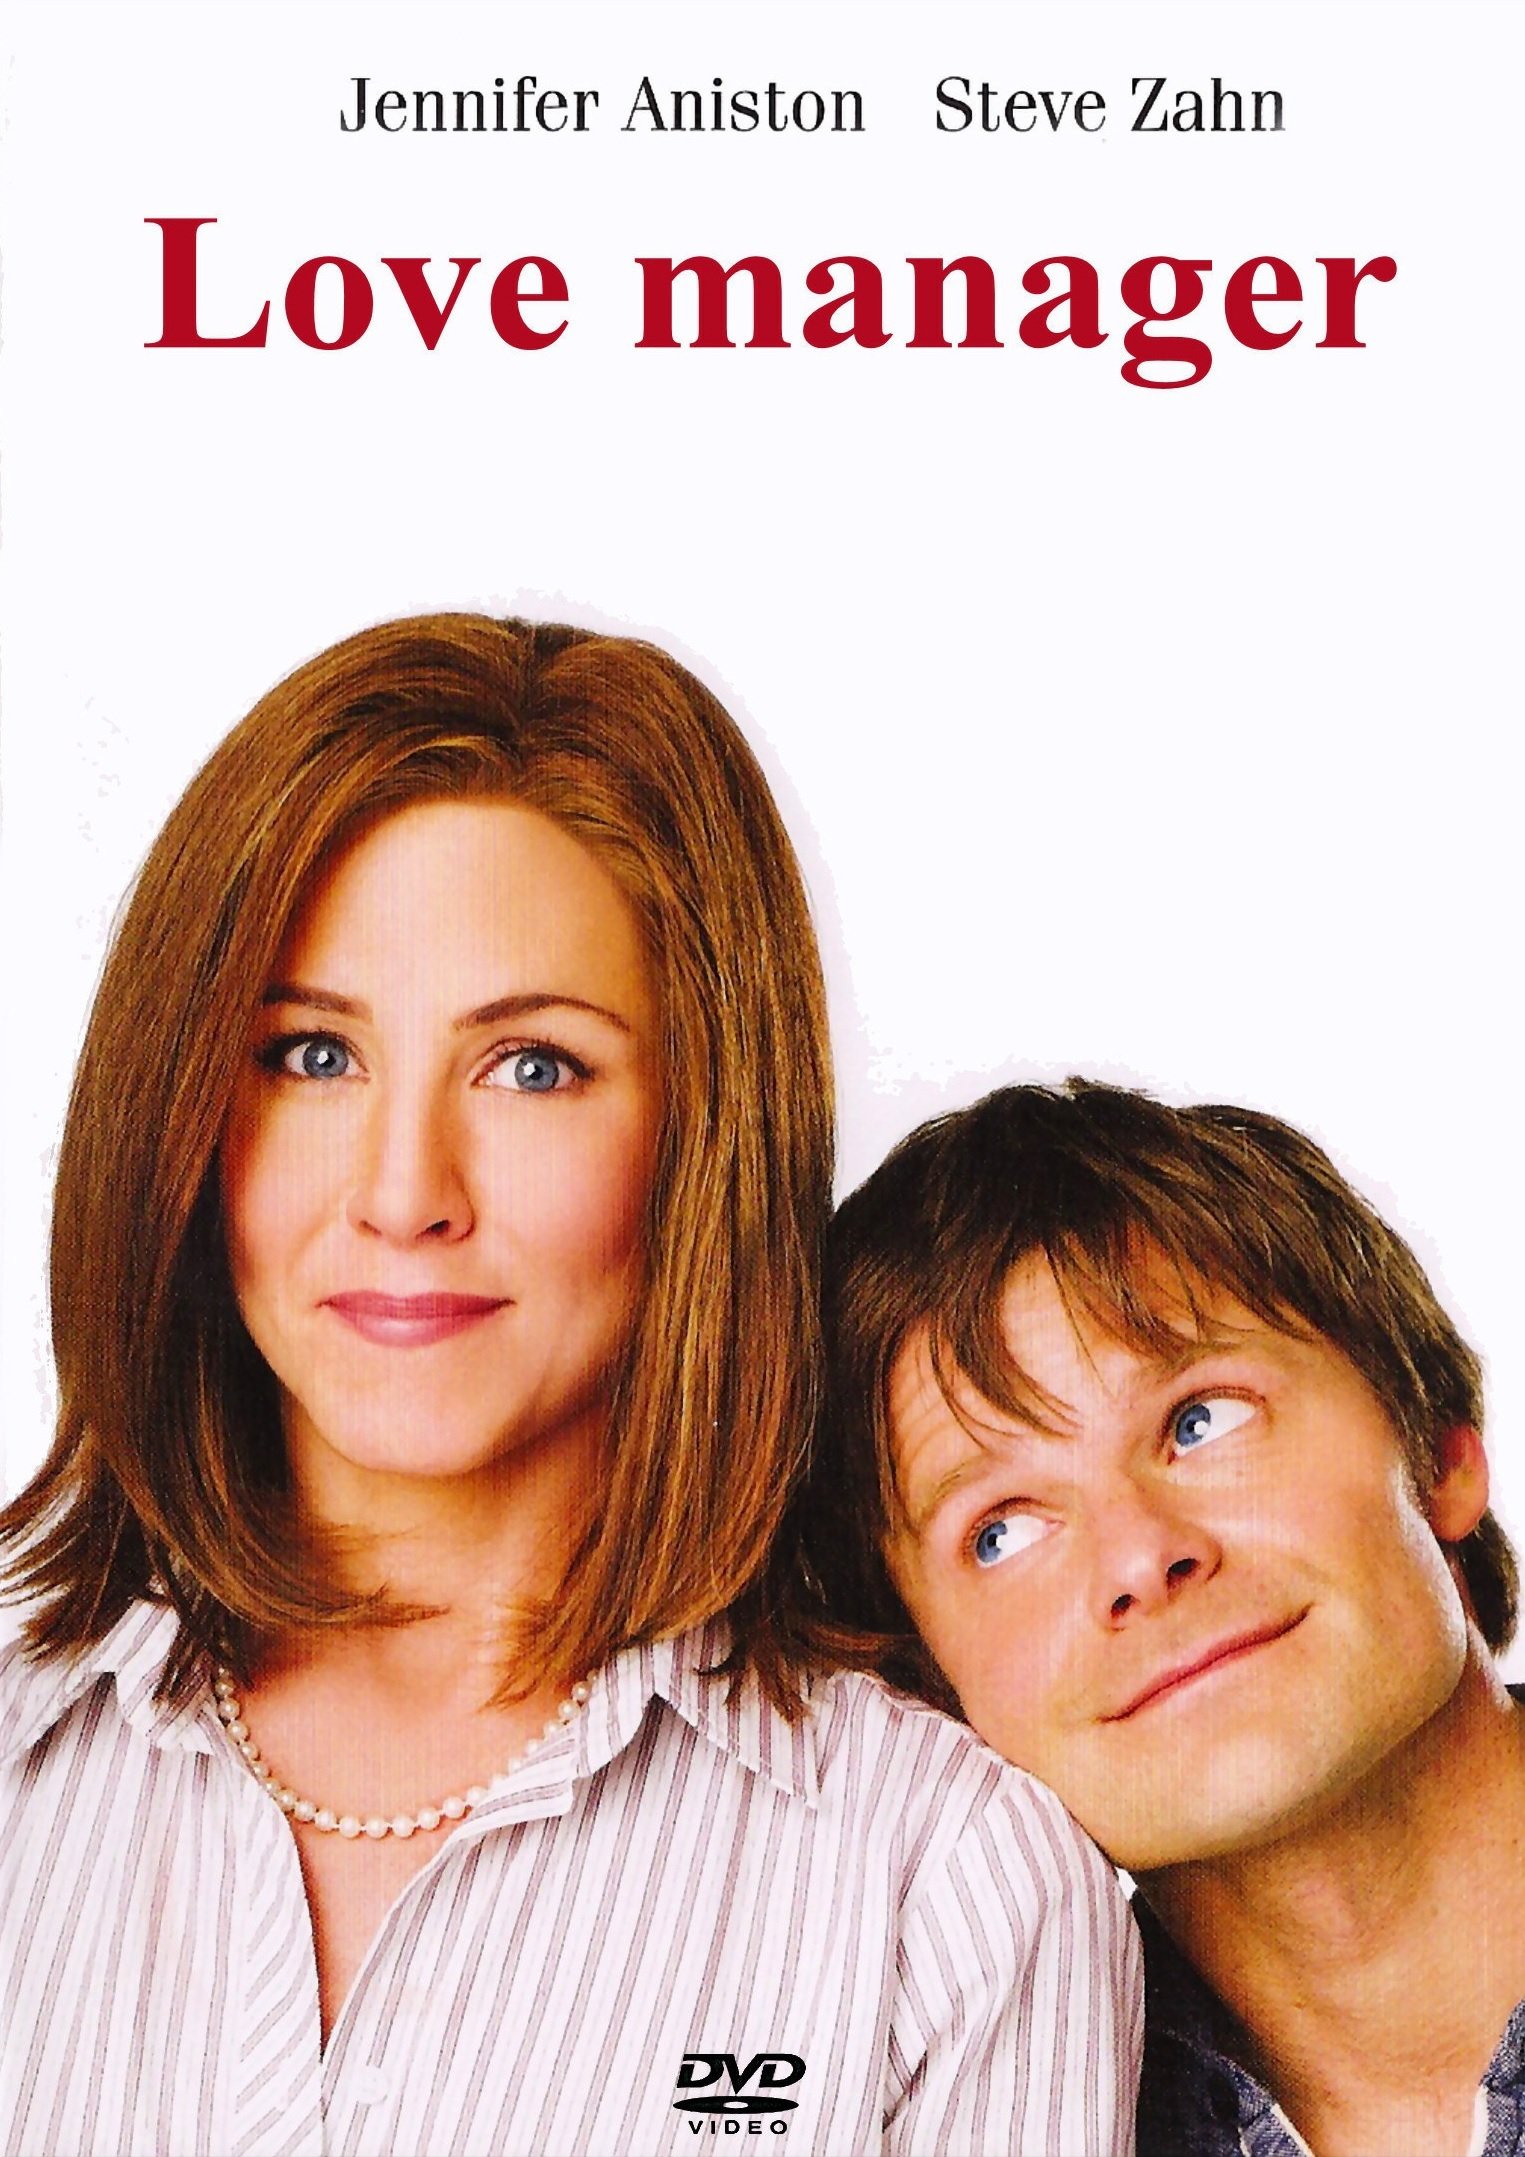 Love manager